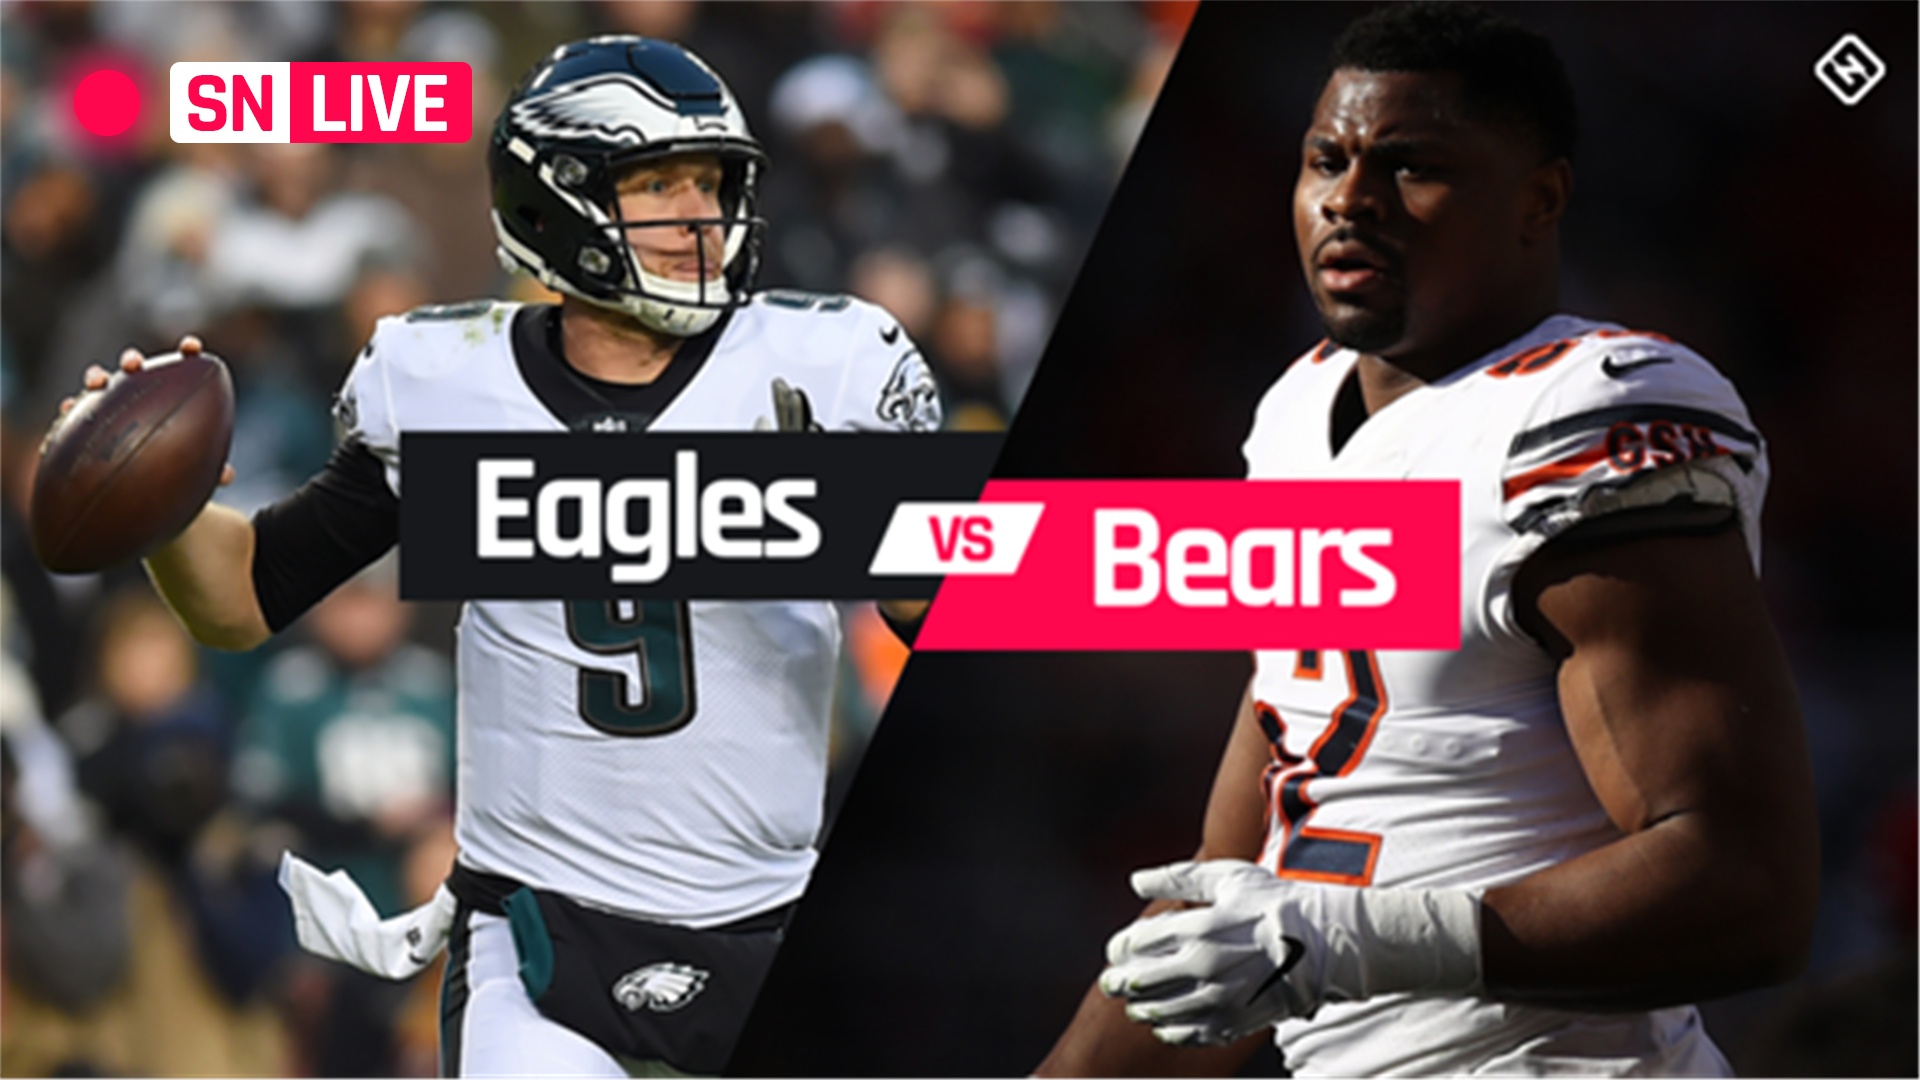 Eagles vs. Bears Score, live updates, highlights from NFC wildcard